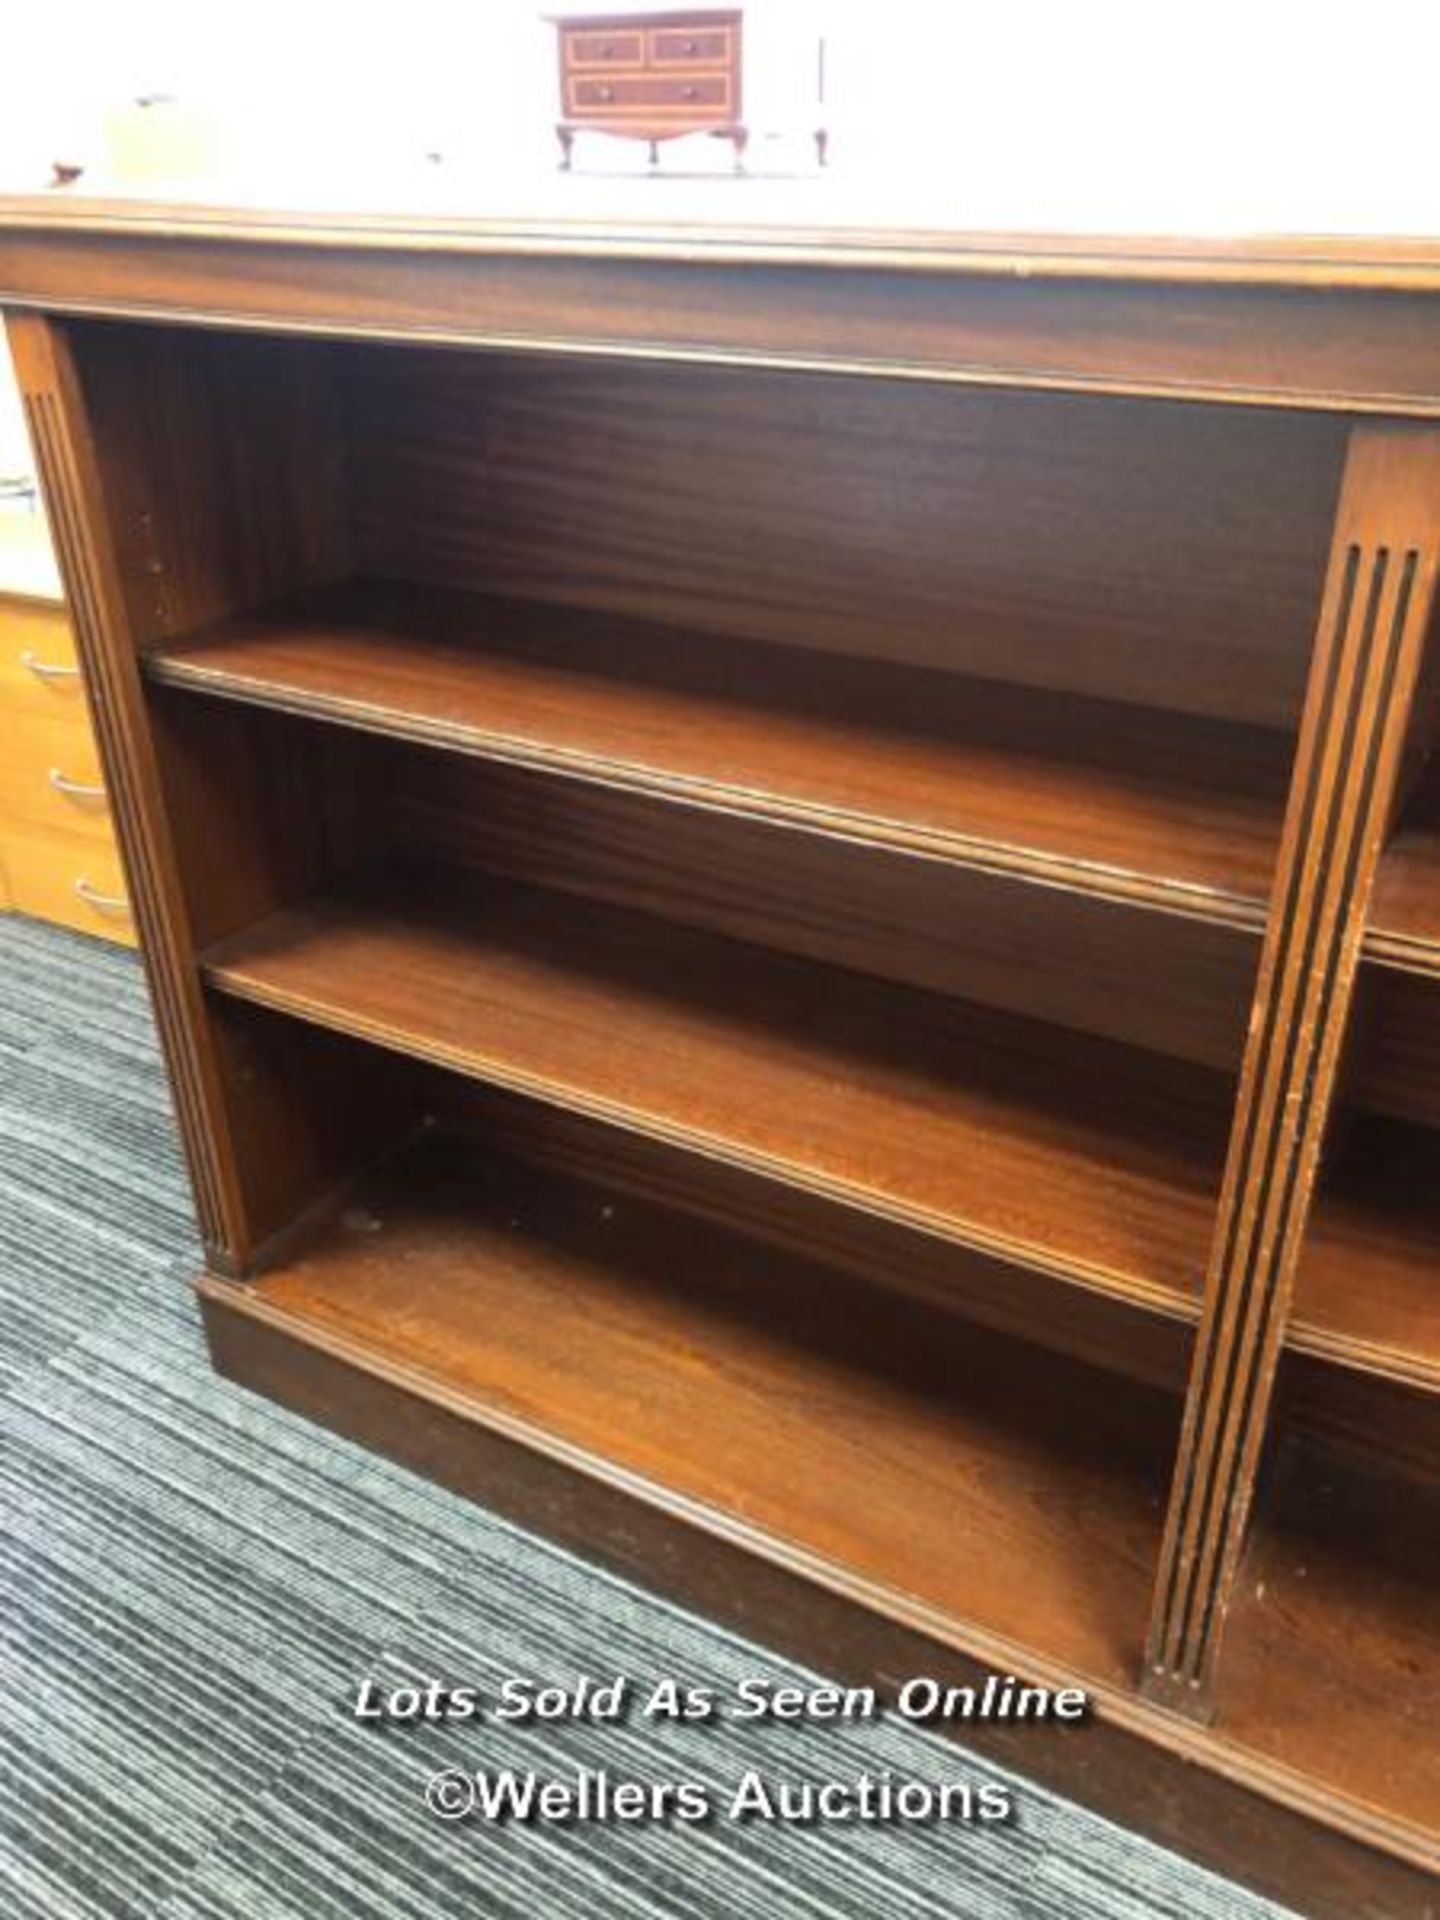 MID-RISE BOOKCASE WITH SIX SHELVES / COLLECTION LOCATION: GODALMING (GU6), FULL ADDRESS AND CONTACT - Image 2 of 4